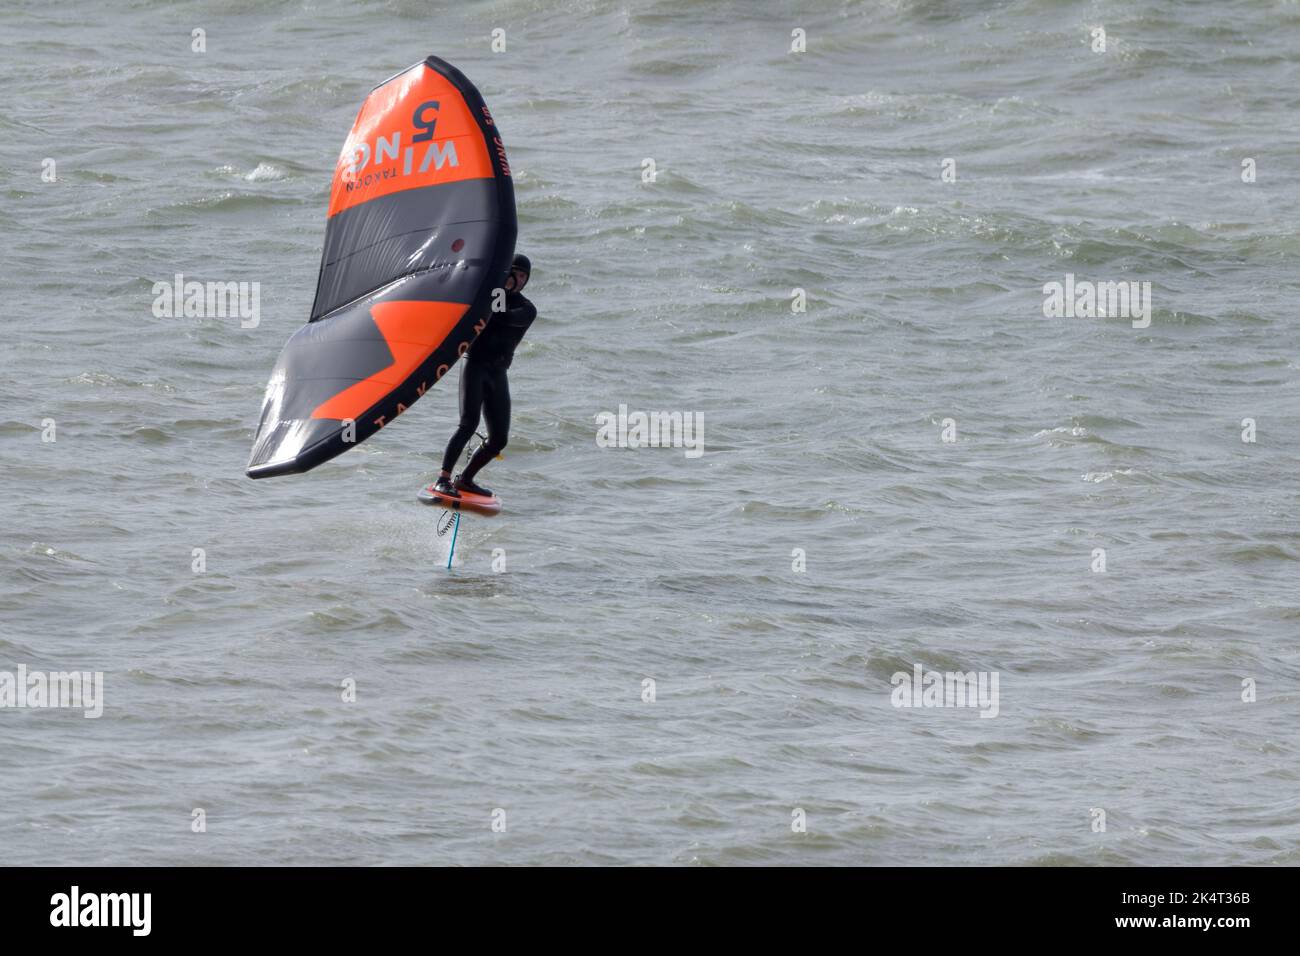 Water sport surfing in the sea with sails for catching the wind to propel the board and surfer. A hydrofoil under the board lifts board above water. Stock Photo